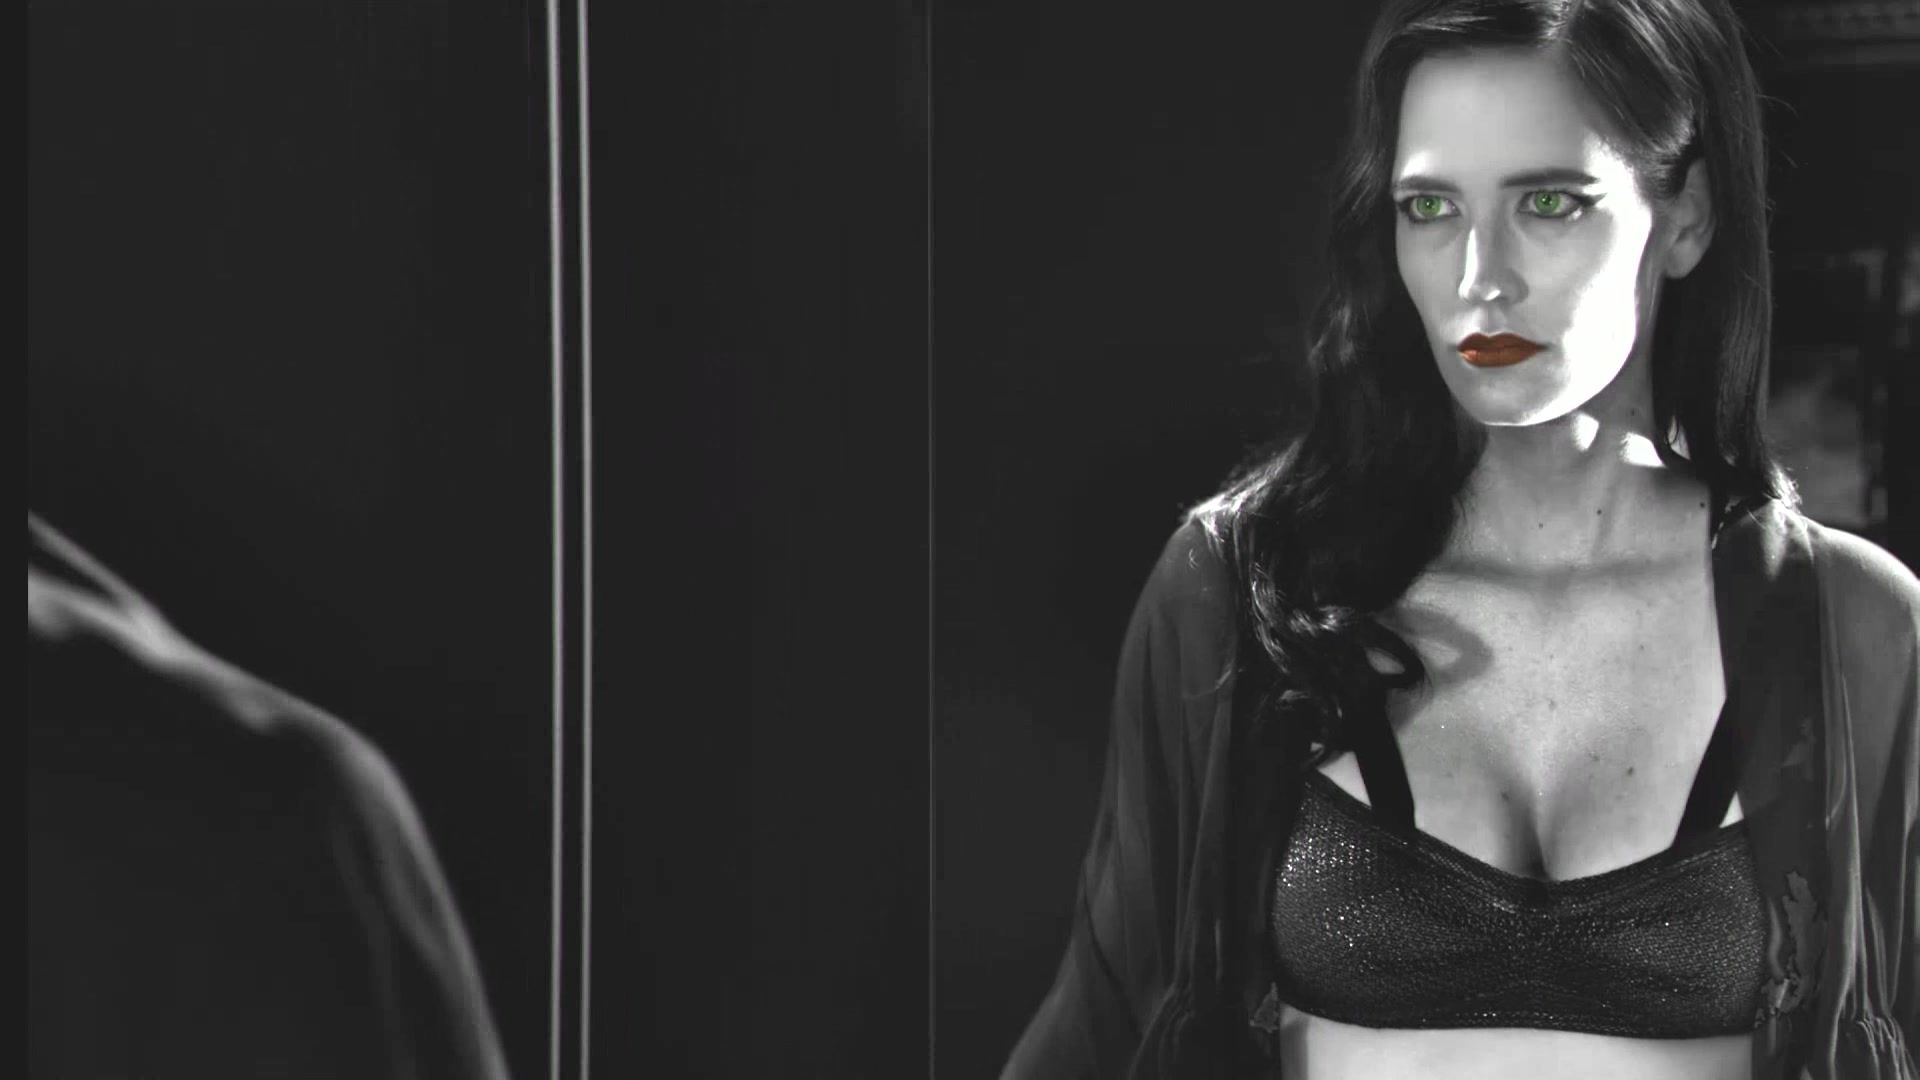 Pete Eva Green - Sin City 2 - A Dame To Kill For (2014) Full HD 1080 BR (Sex, Nude, FF) HDZog